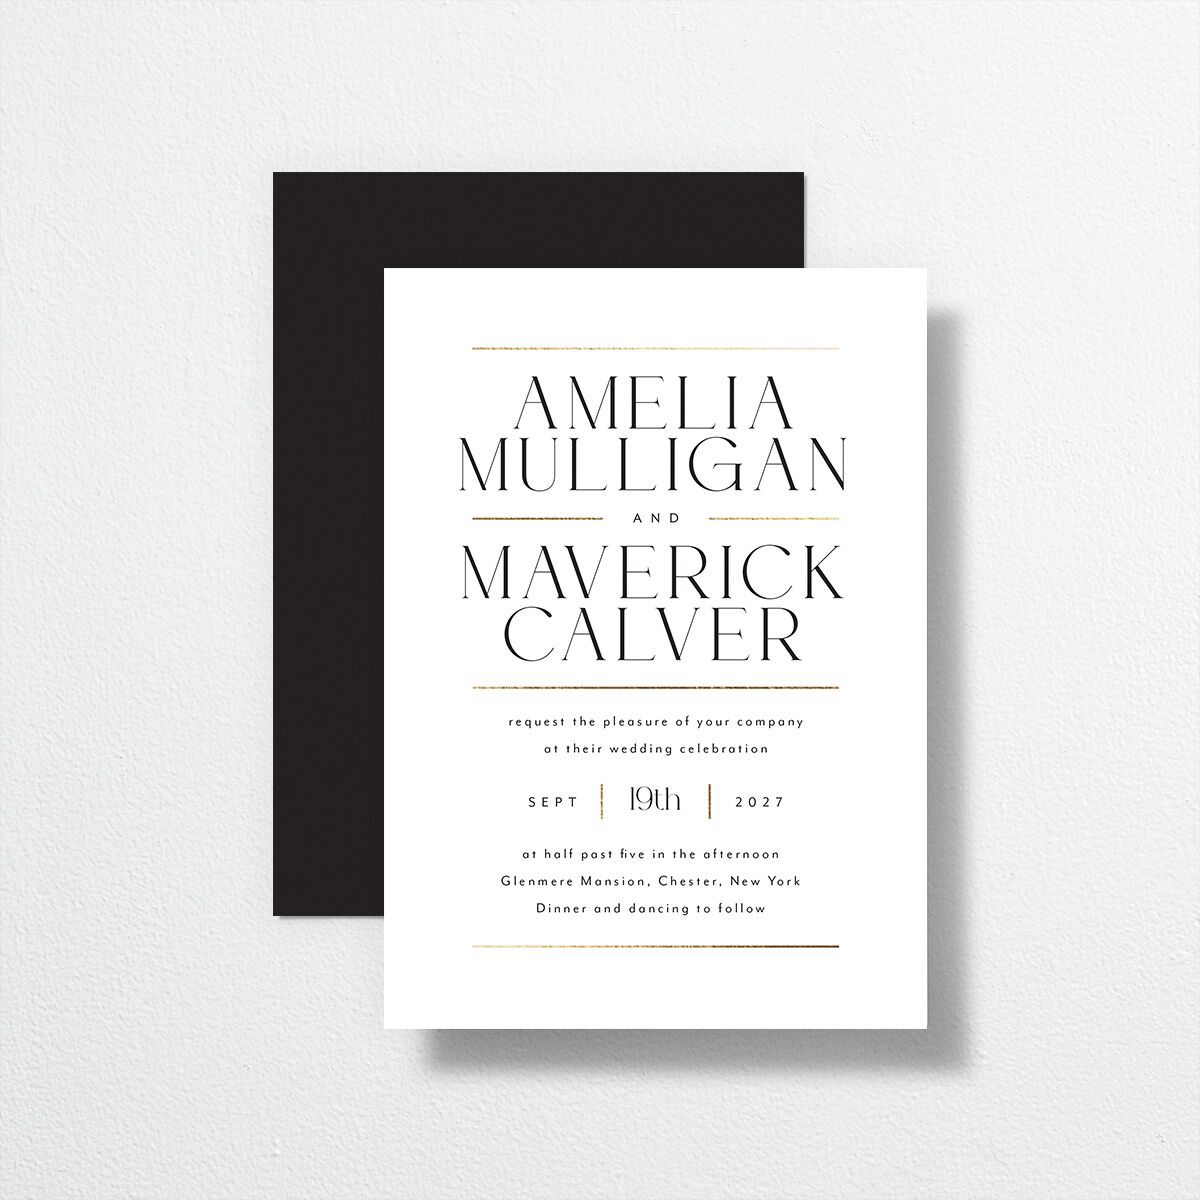 Estate Wedding Invitations front-and-back in white